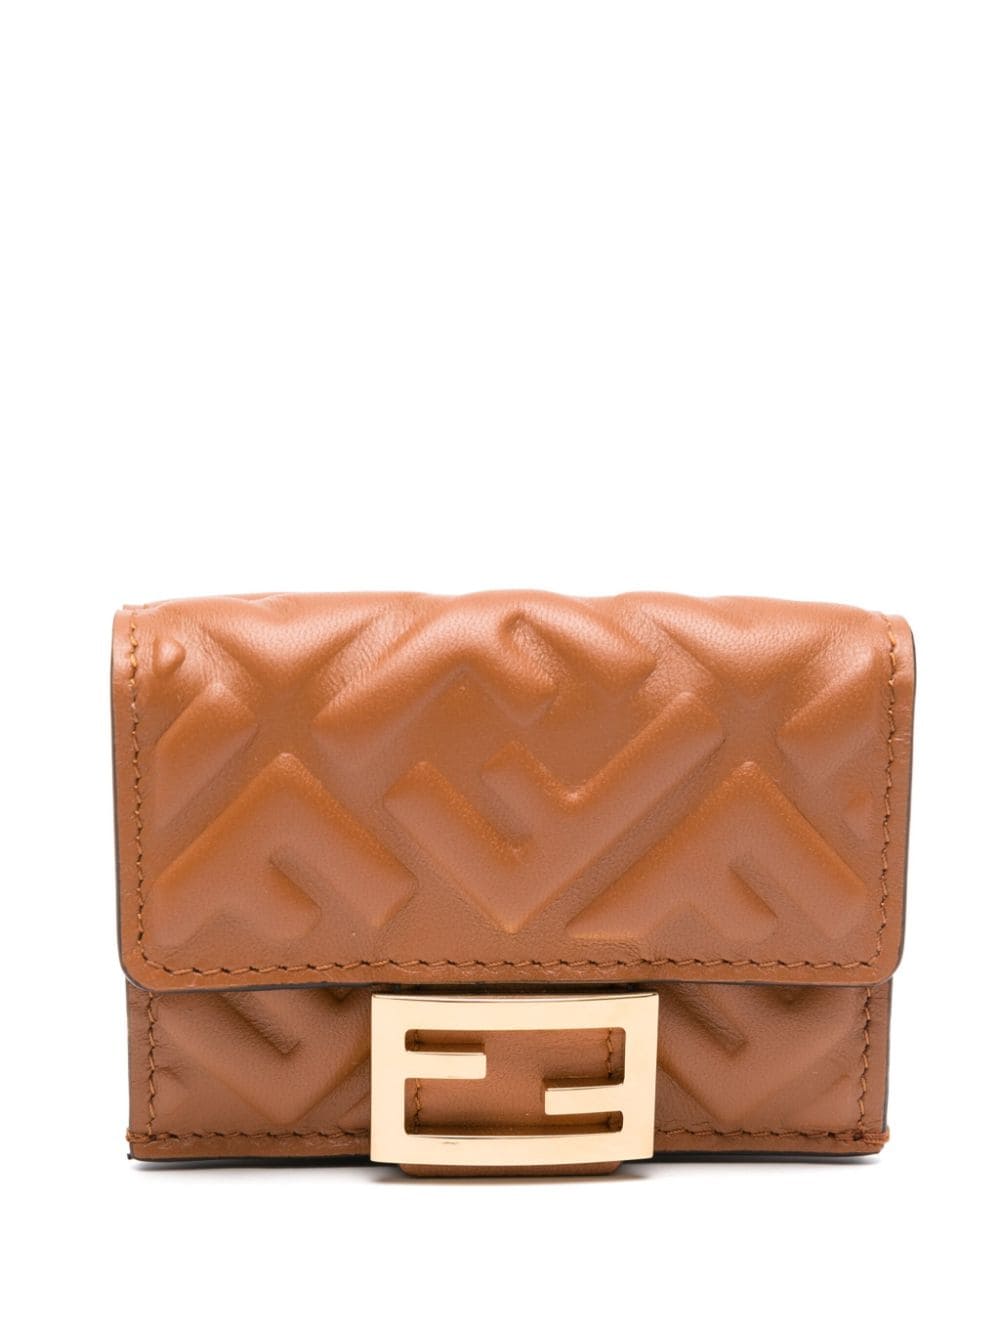 Fendi Baguette Micro Trifold Leather Wallet In Brown